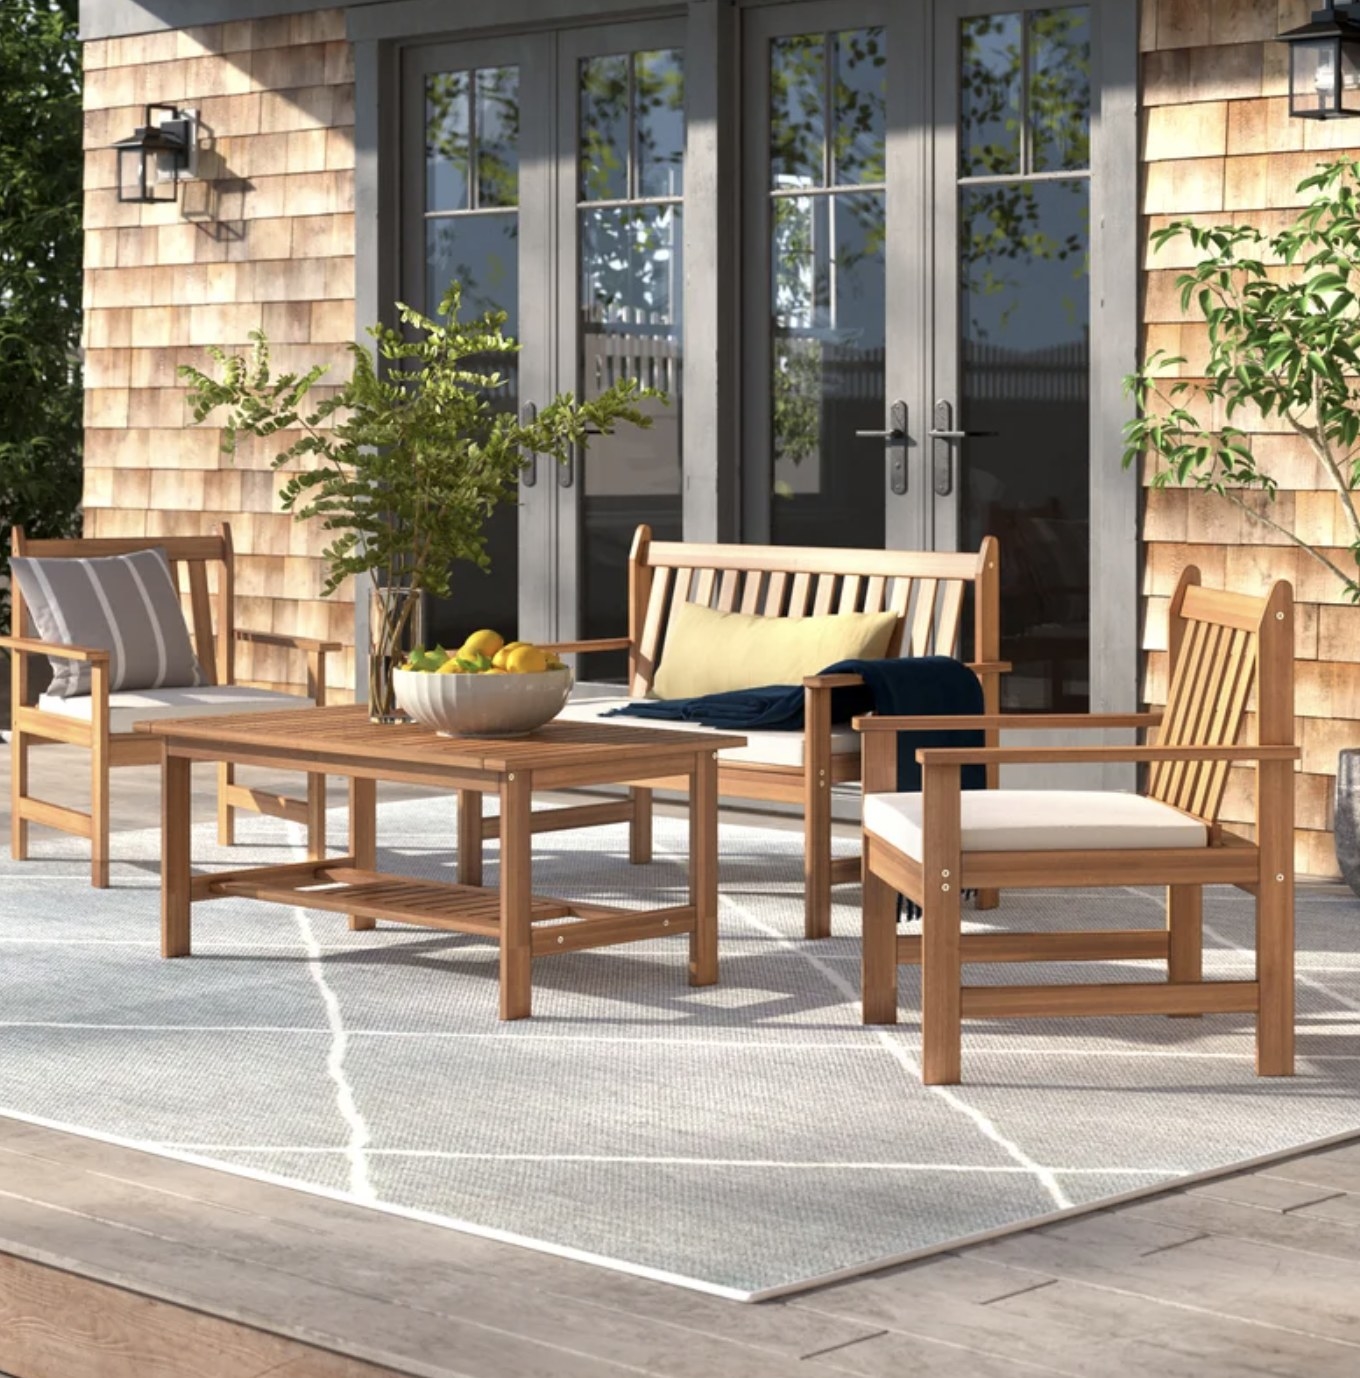 The light brown table, bench and chair set with white cushions are outside with the sun shining directly on them